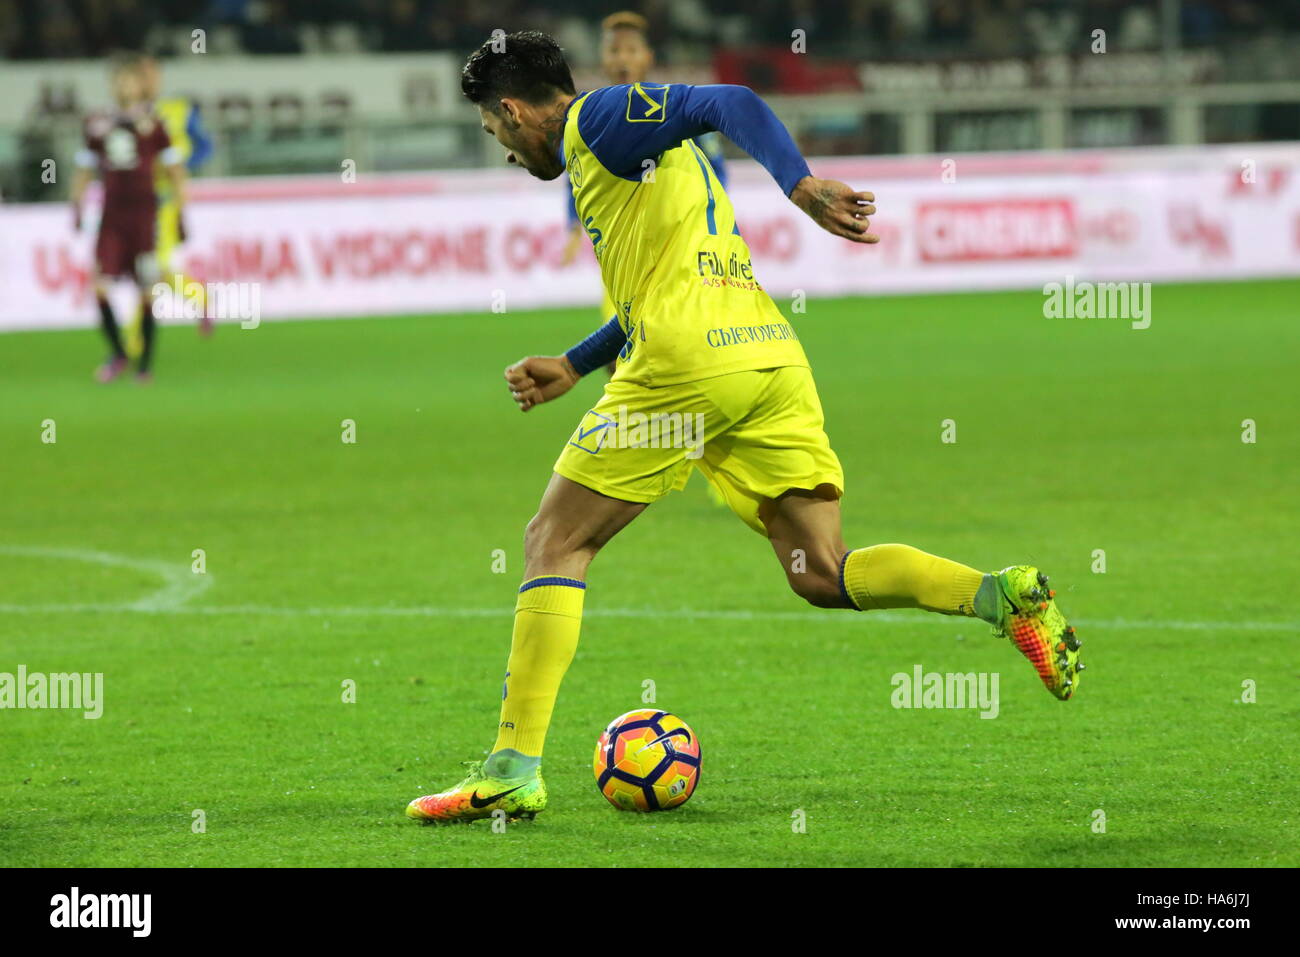 Lucas Manuel Castro of Chievo Verona in action during the Serie A football  match between Torino FC and AC Chievo Verona. Torino FC wins over AC Chievo  Verona for 2-1. (Photo by